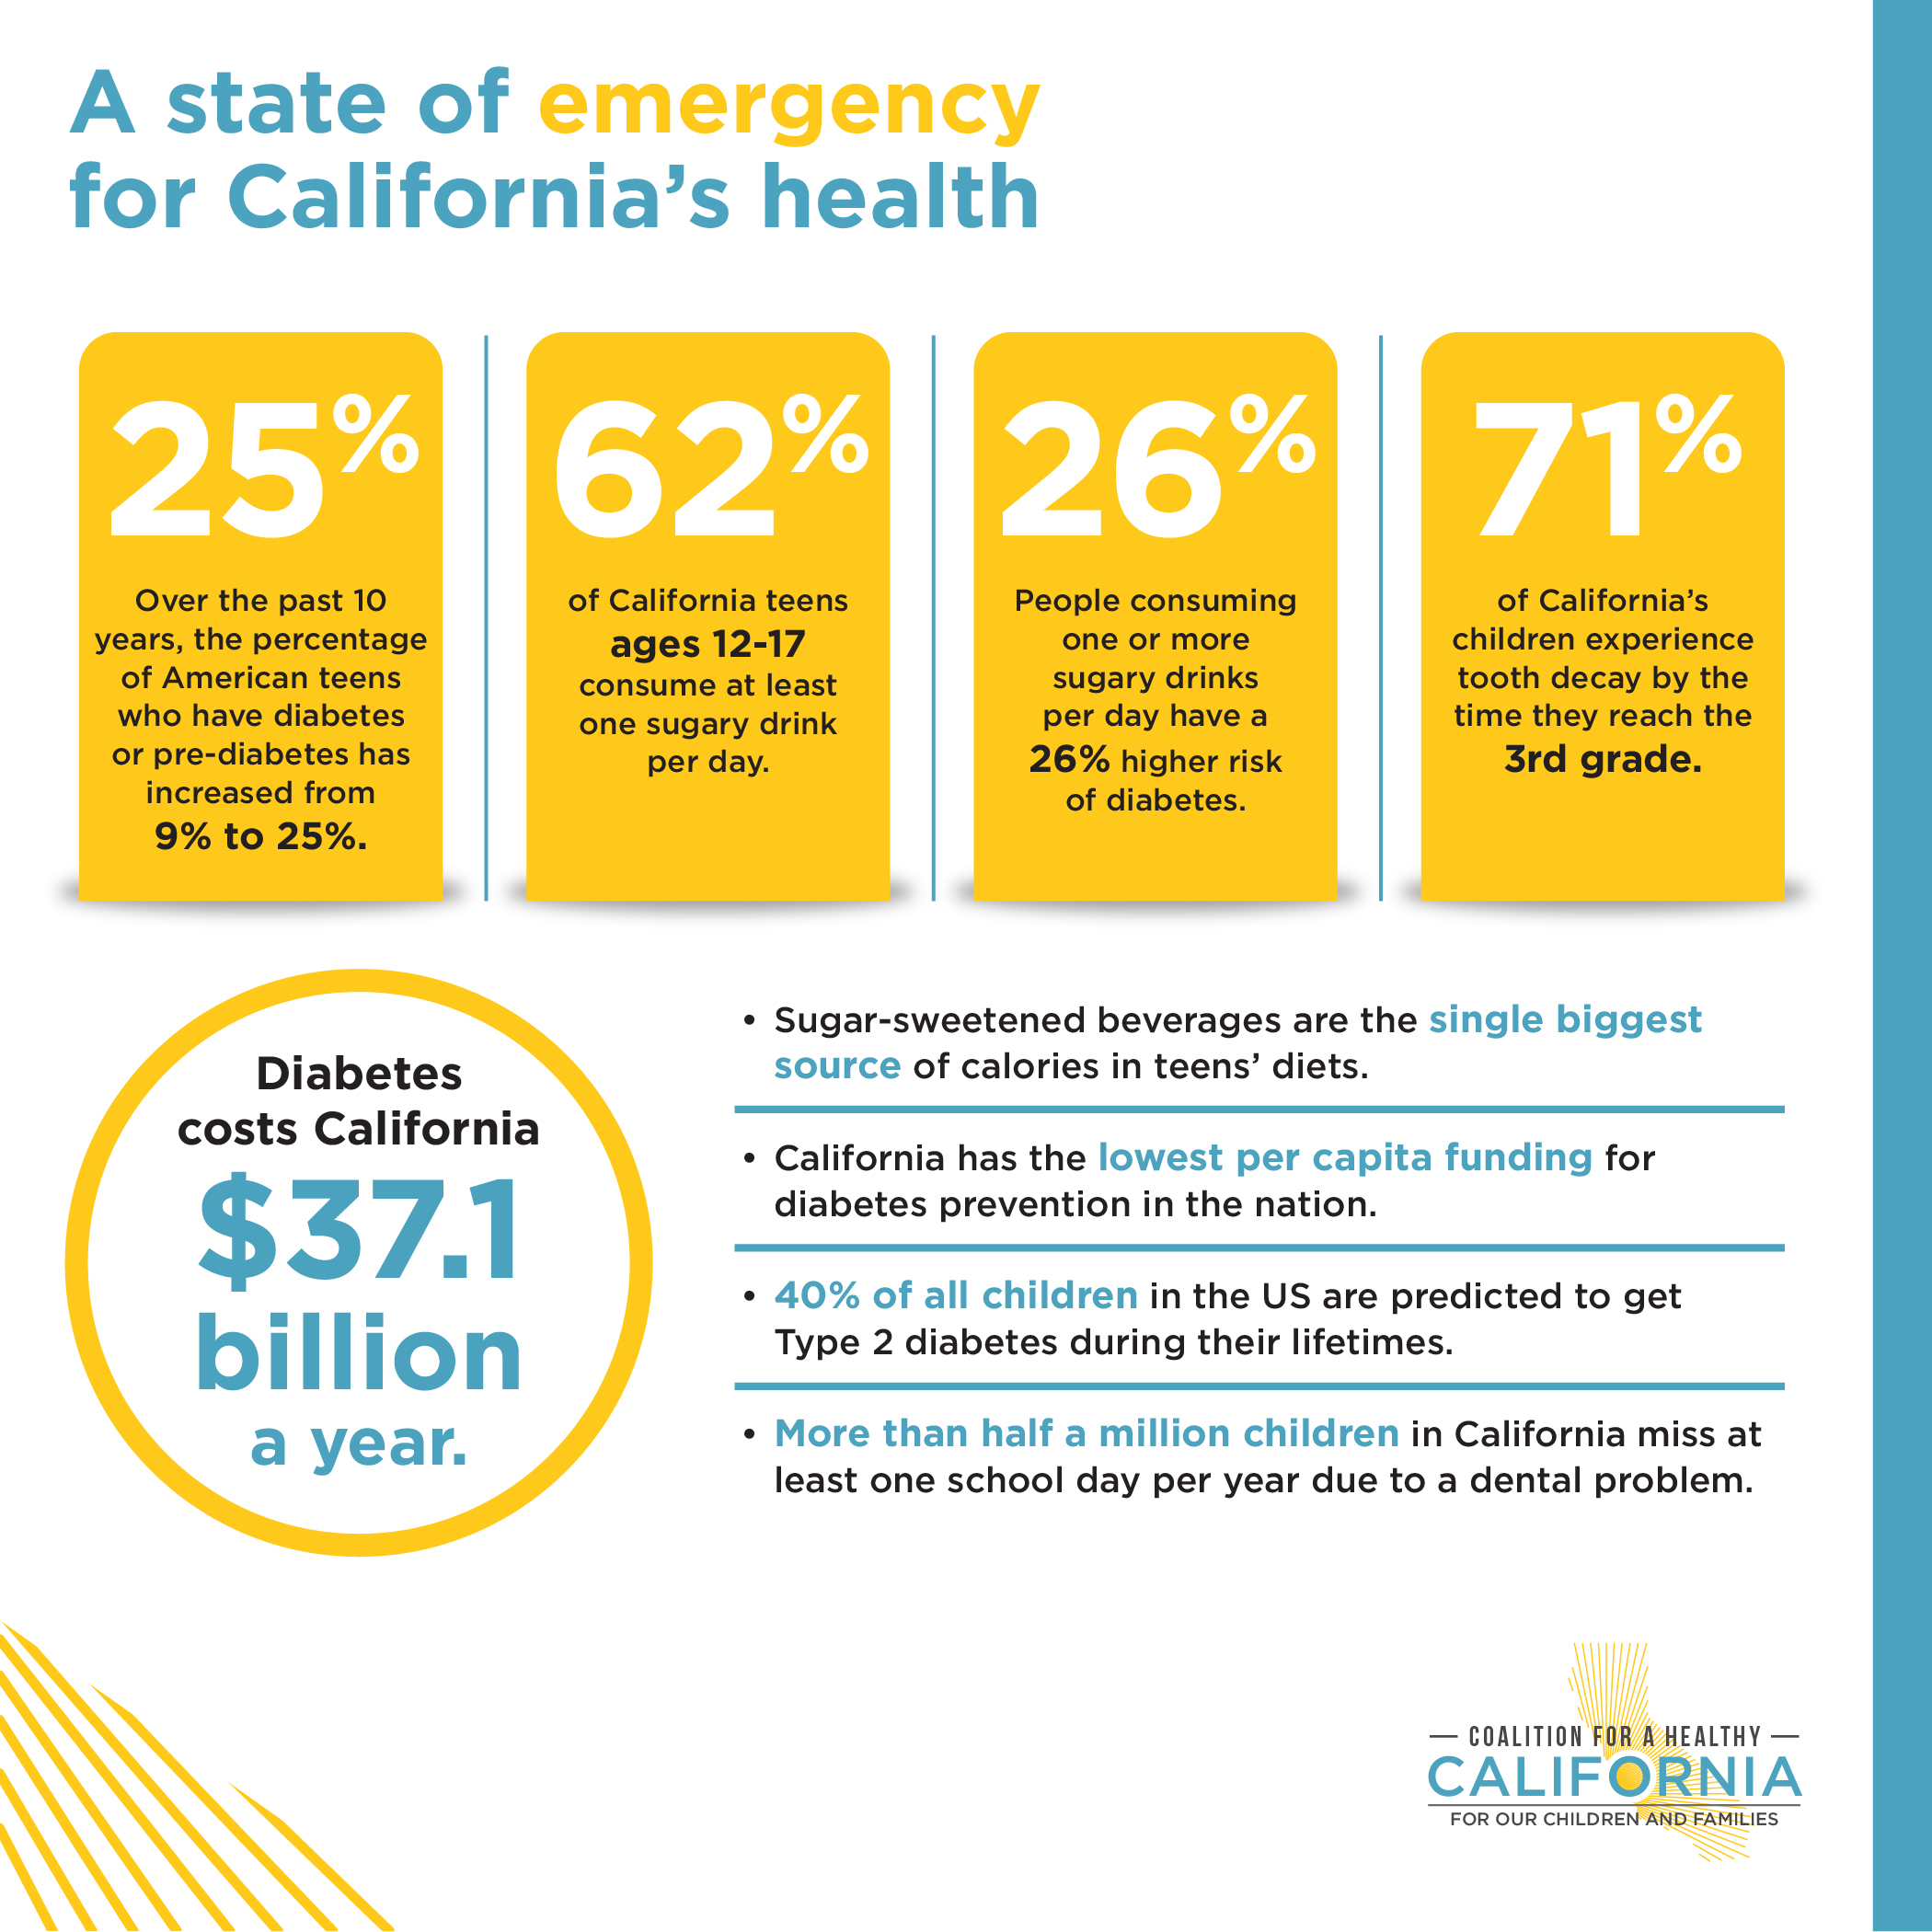 Coalition for a Healthy California benefits of AB 2782. A state of emergency for California's health.